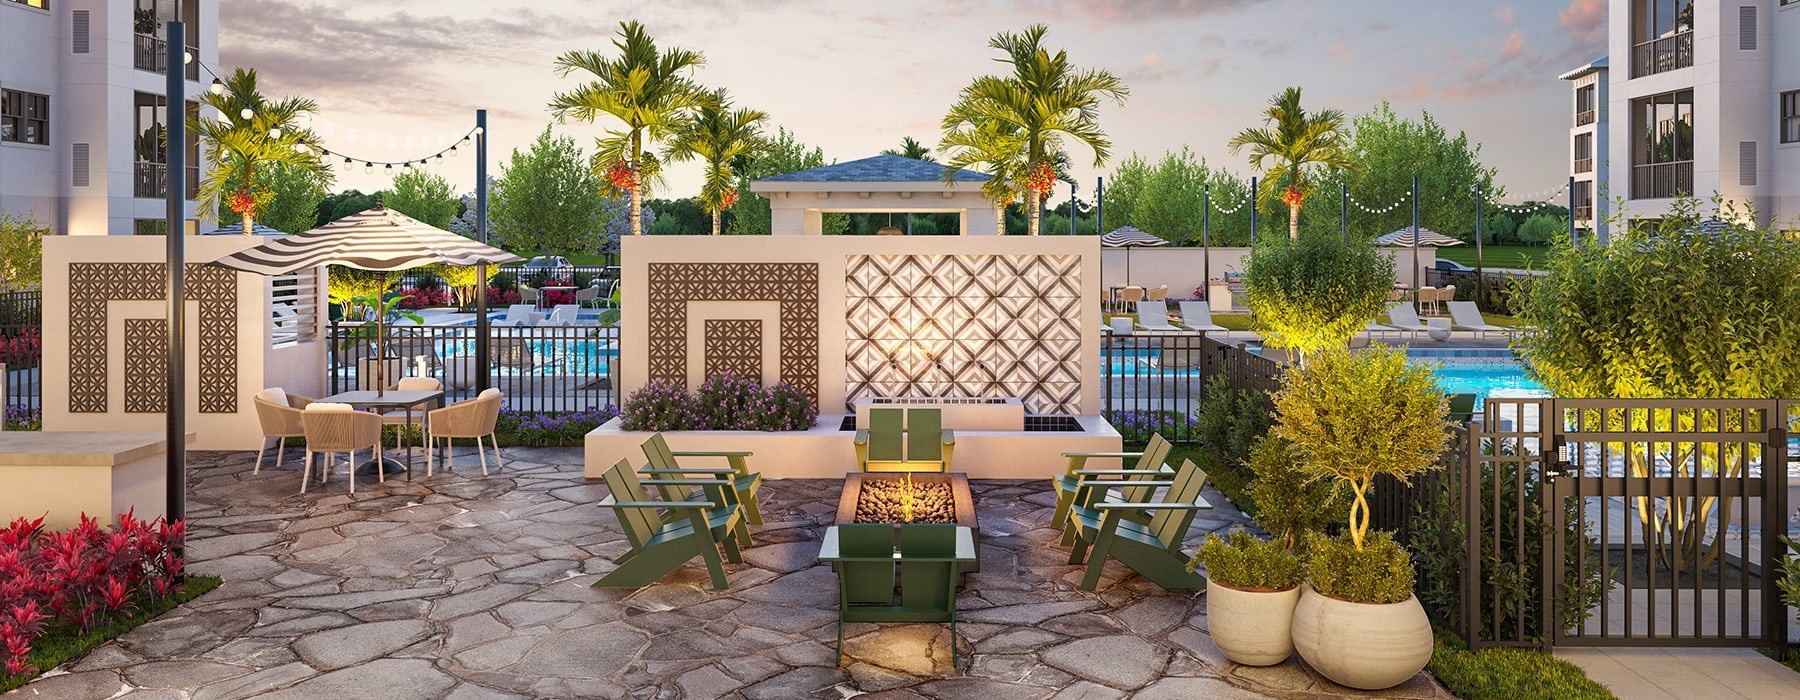 rendering of courtyard showing easy access to a pool. landscaping and modern seating